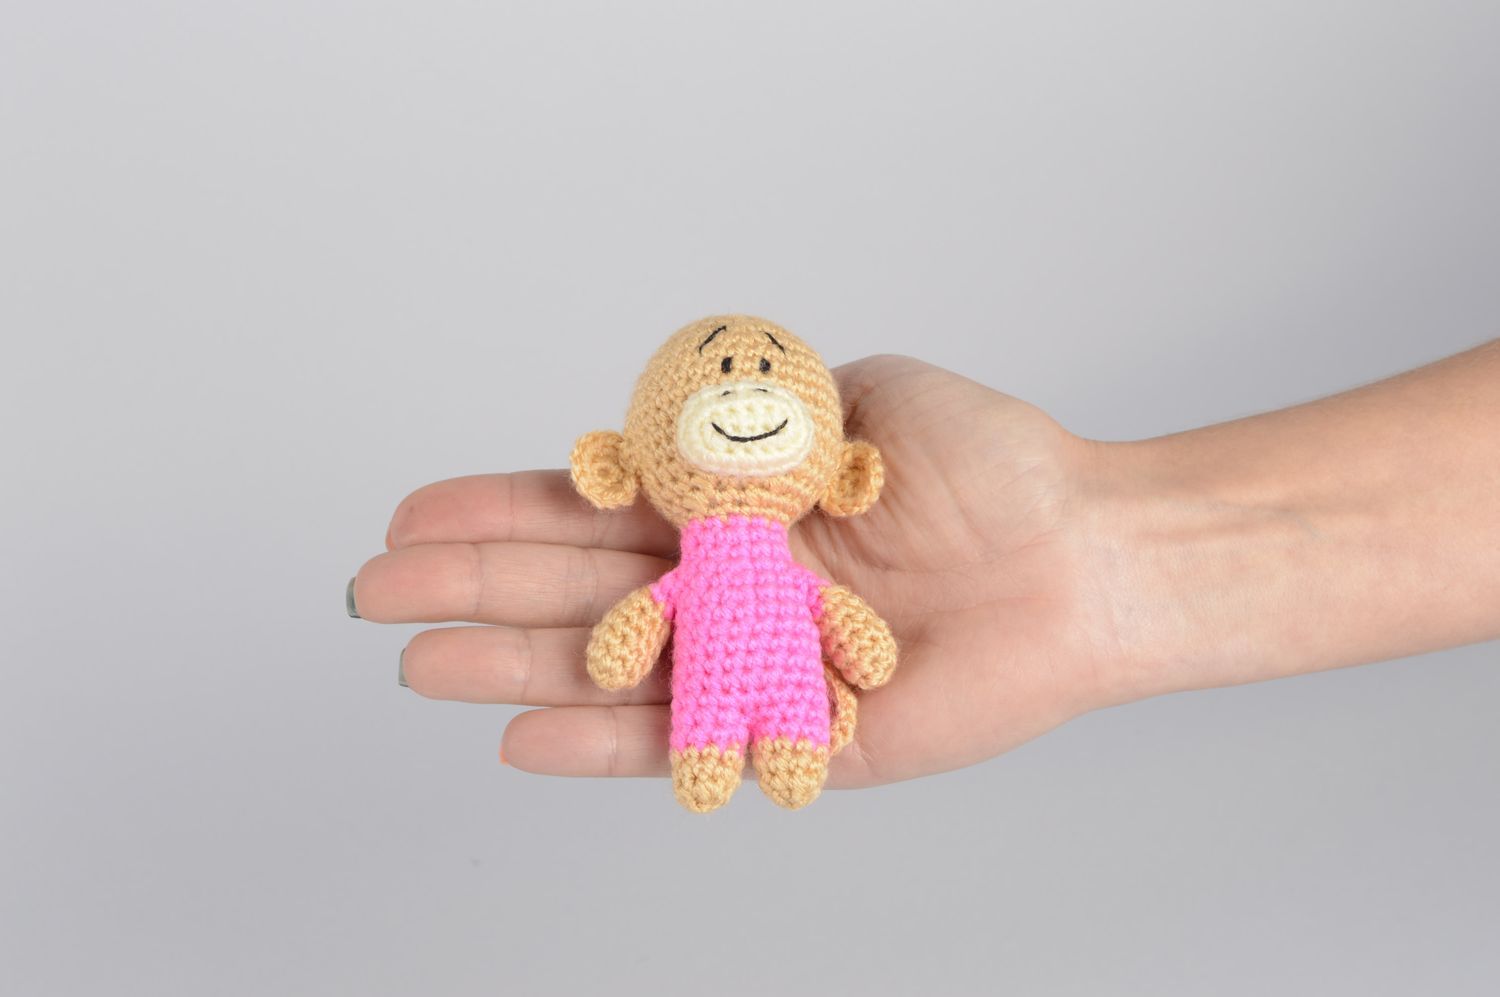 Beautiful handmade crochet toy childrens toys crochet ideas gifts for kids photo 5